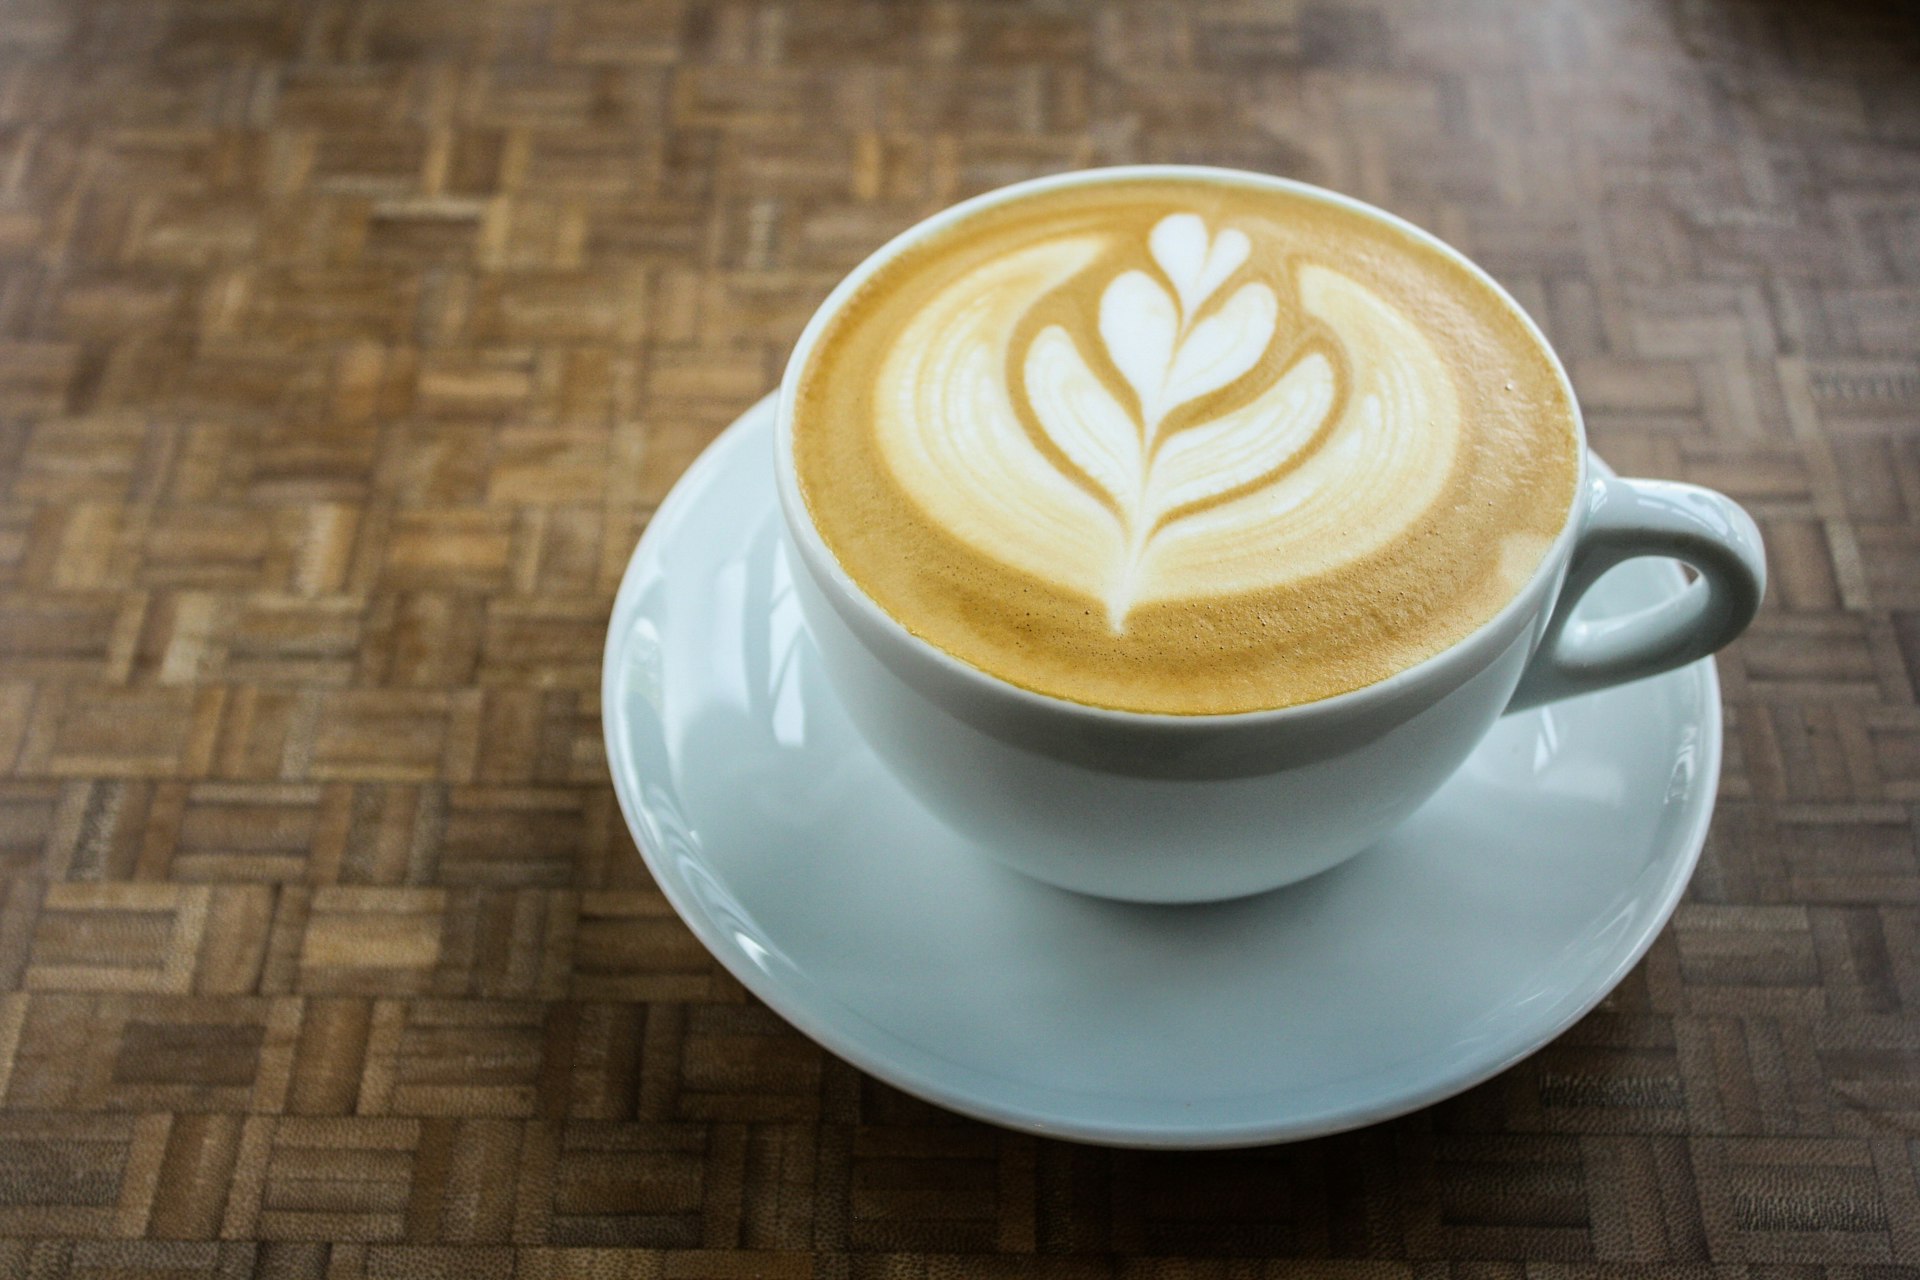 A latte from Coava Coffee. Image by Alexander Howard / Lonely Planet